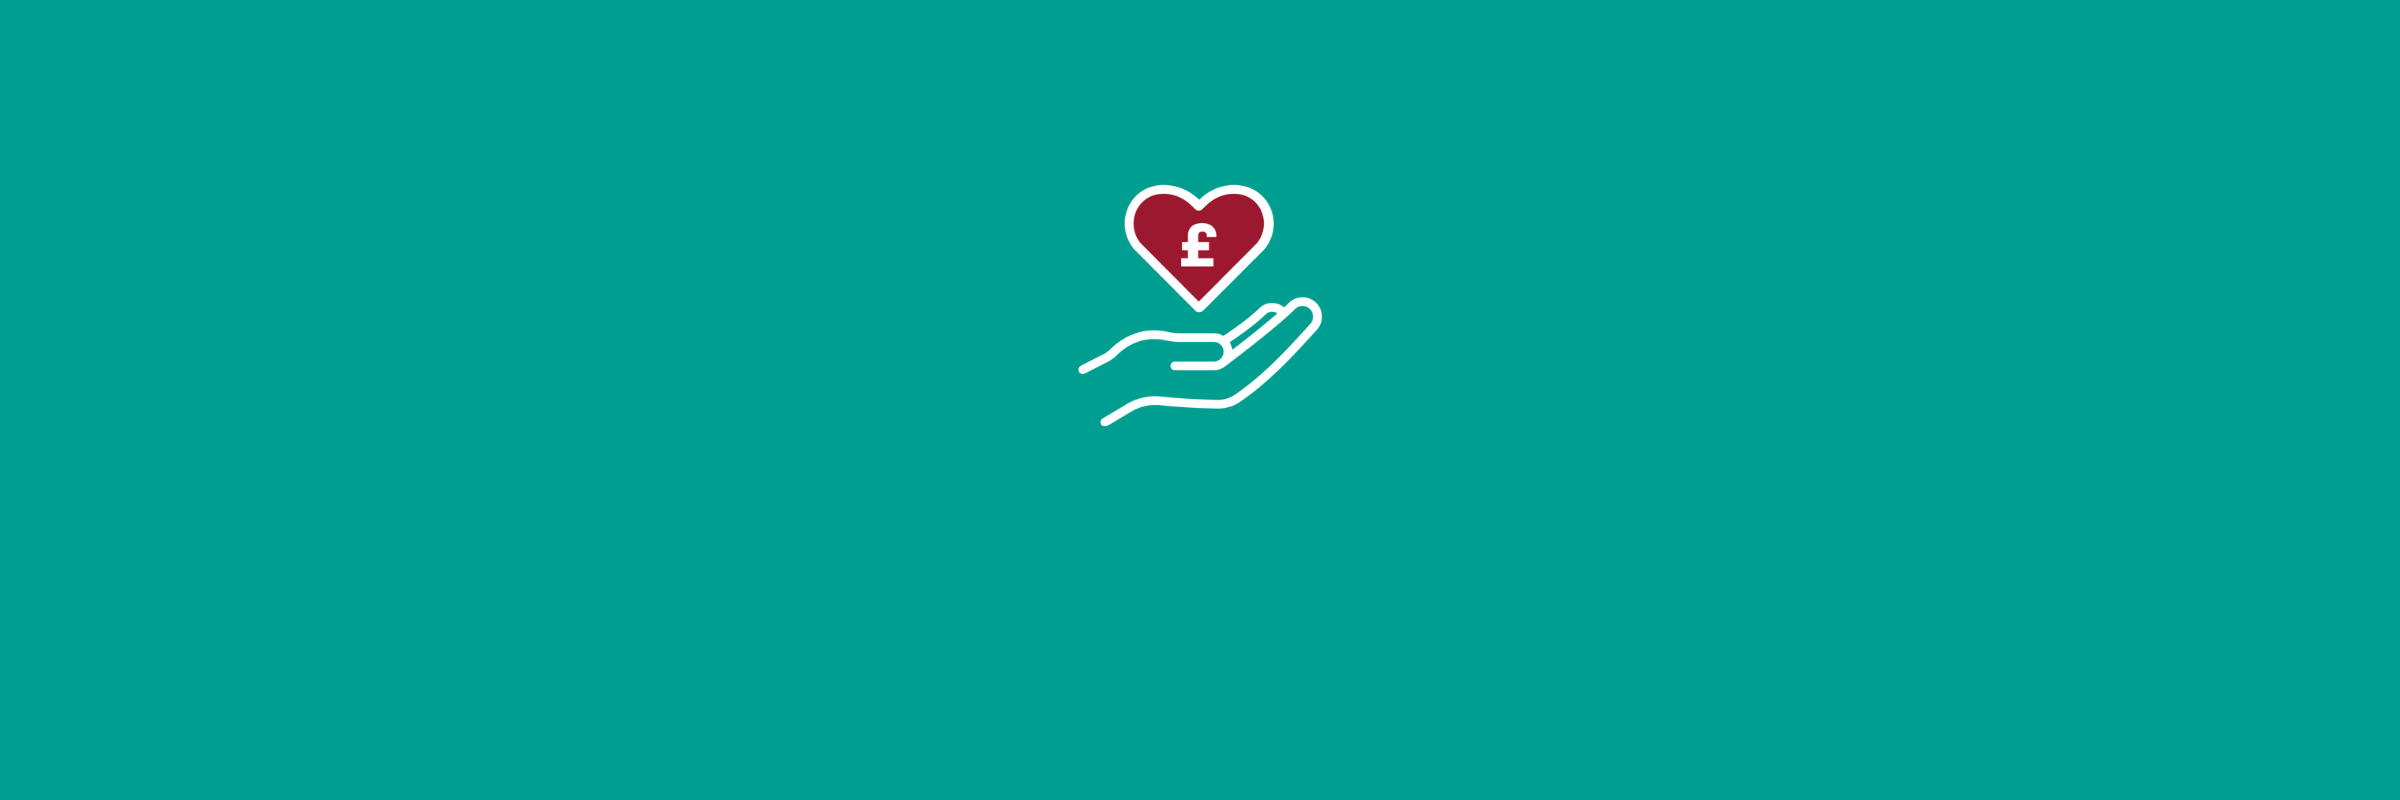 Graphic of a hand holding a heart with a pound sign inside